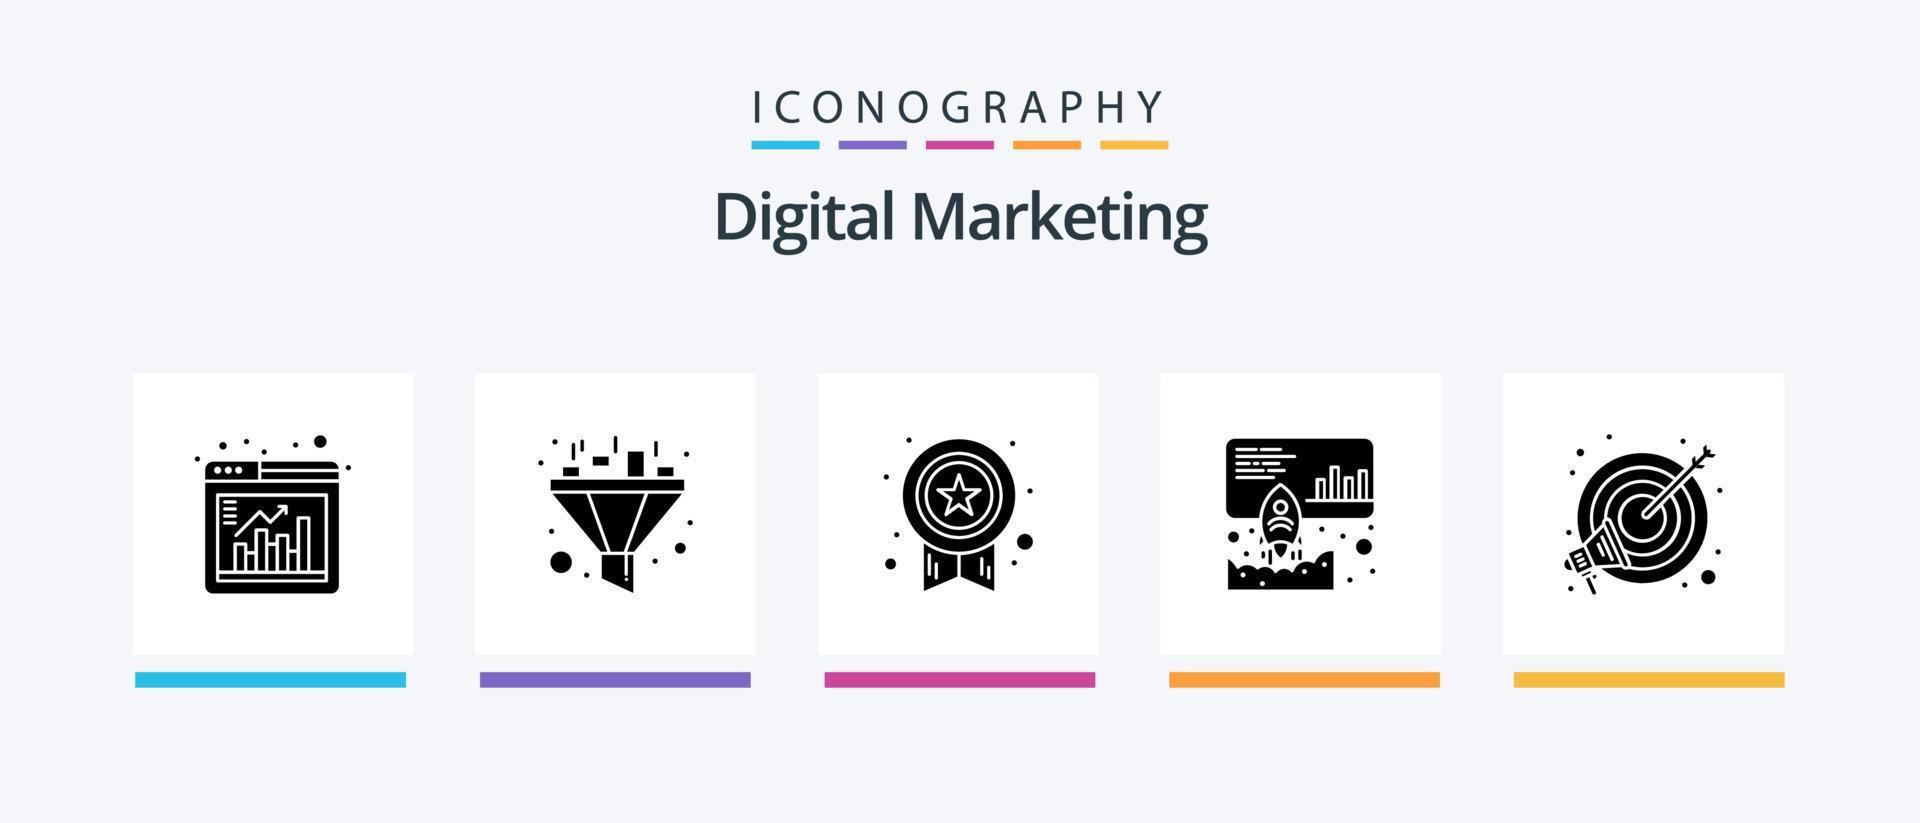 Digital Marketing Glyph 5 Icon Pack Including focus. goal. medal. promote. launch. Creative Icons Design vector